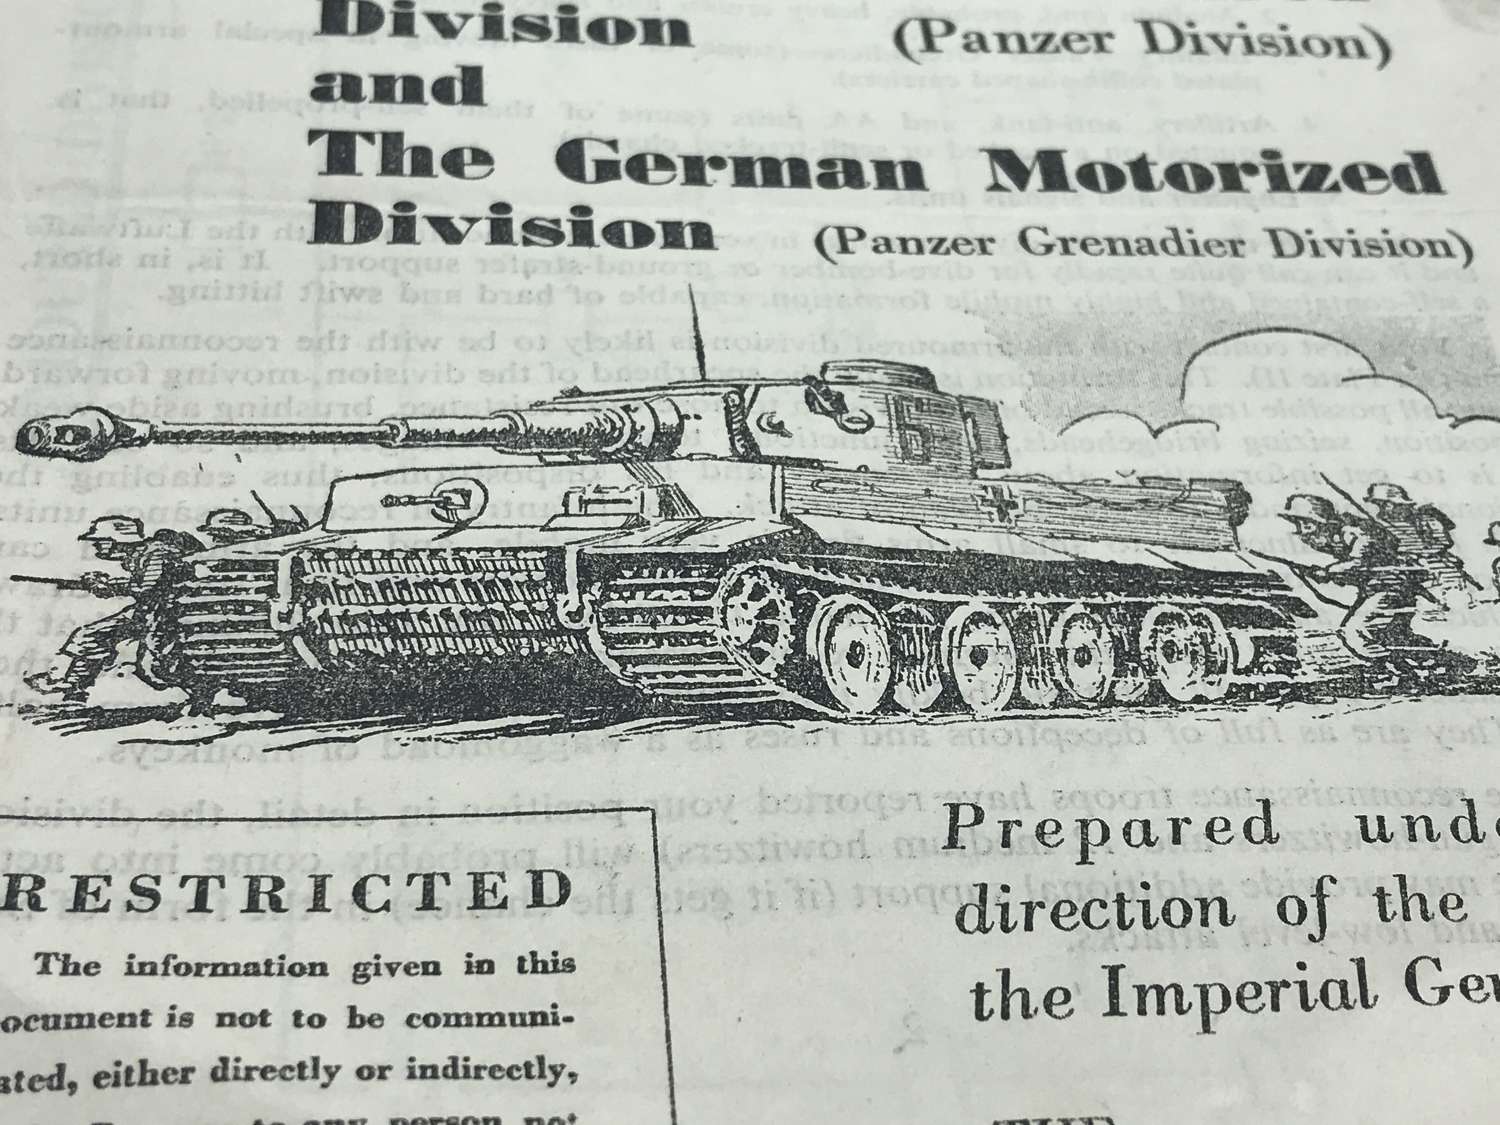 Popular guide to the German army dated January 1944